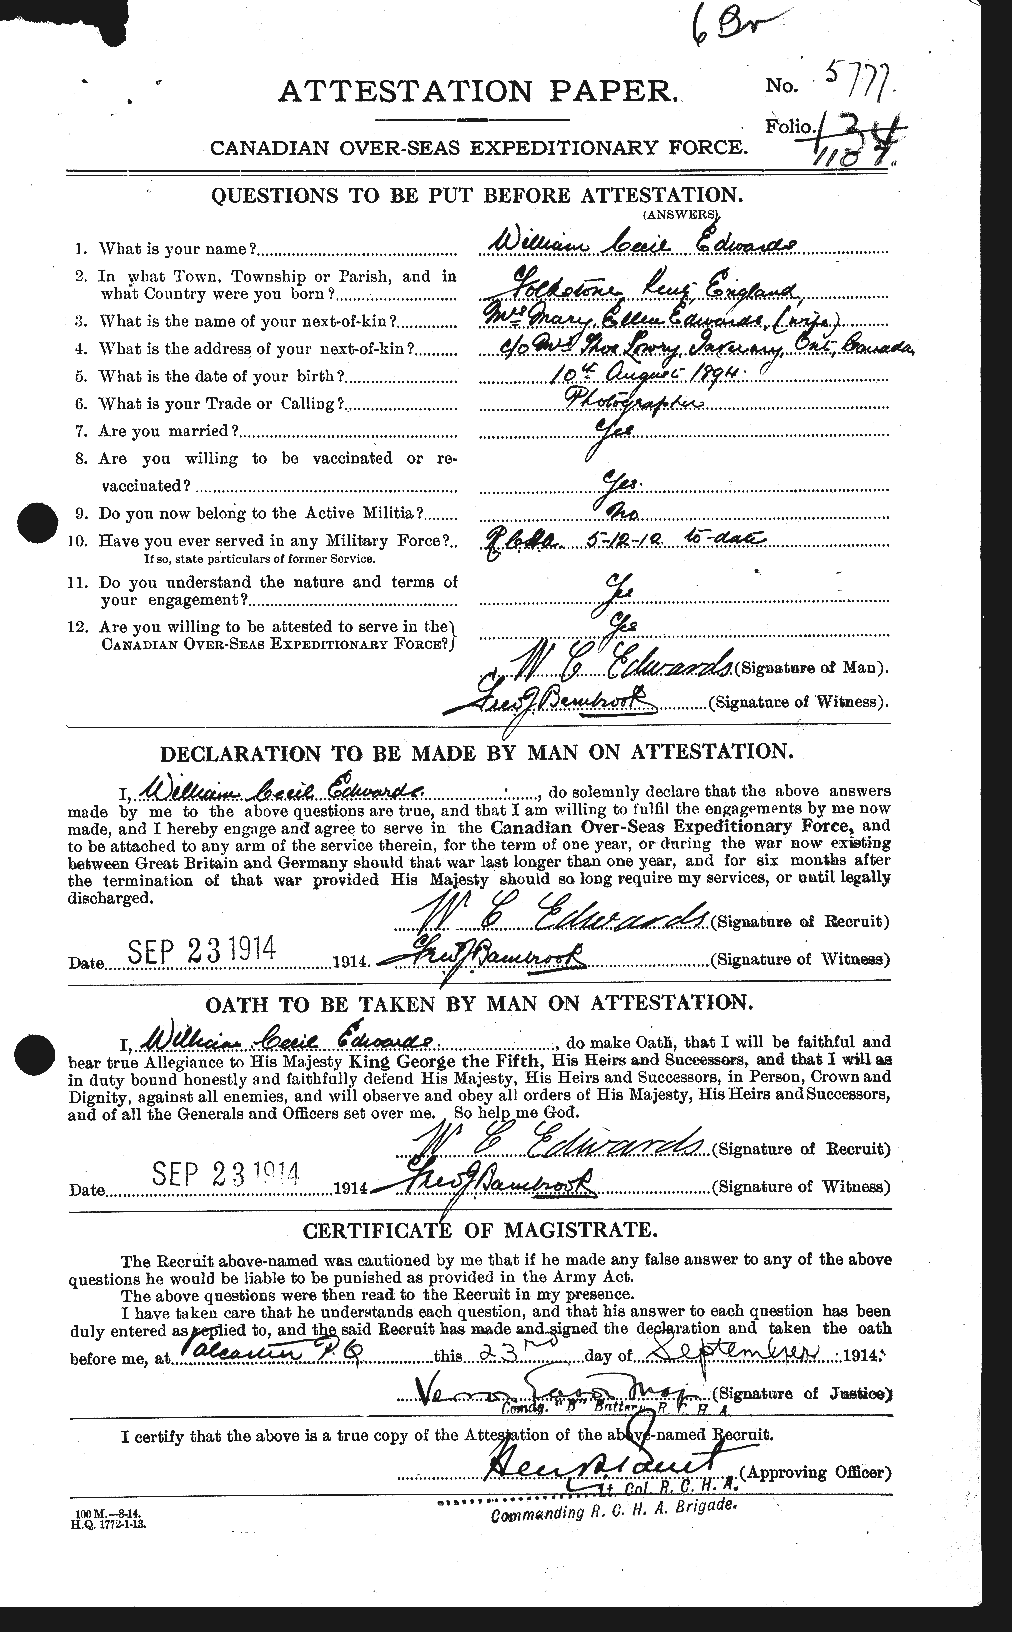 Personnel Records of the First World War - CEF 310415a